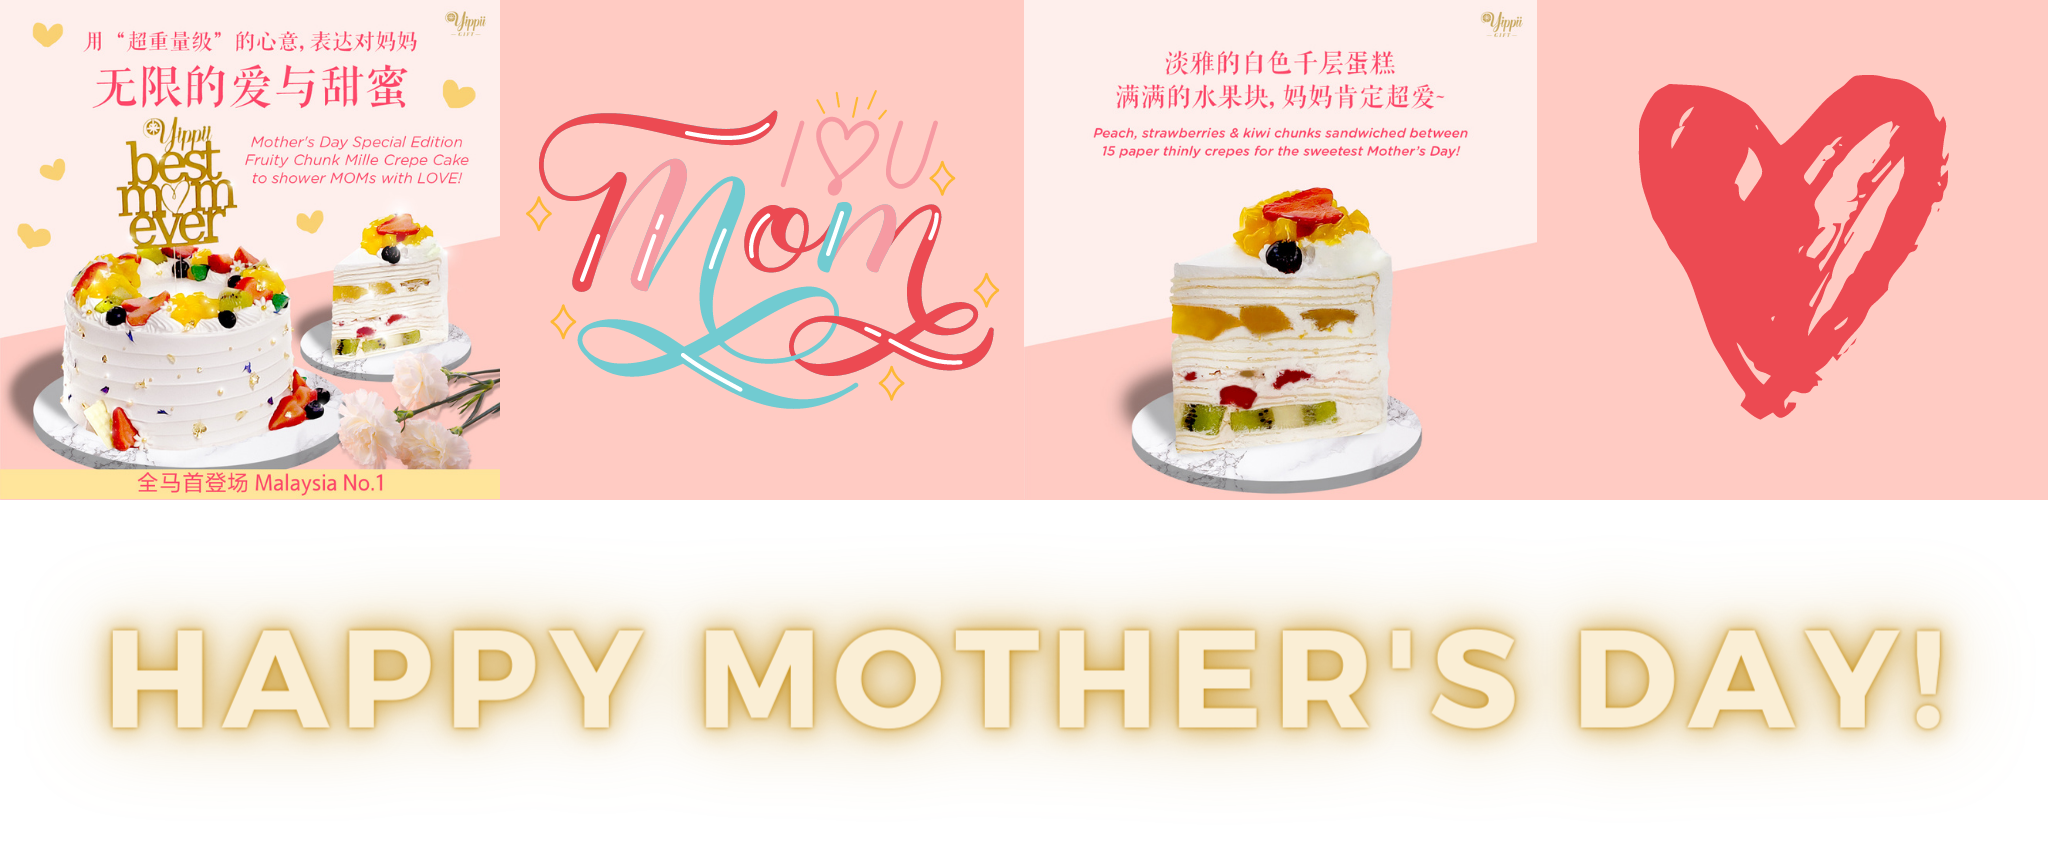 Mother's Day Fruity Chunk Mille Crepe Cake